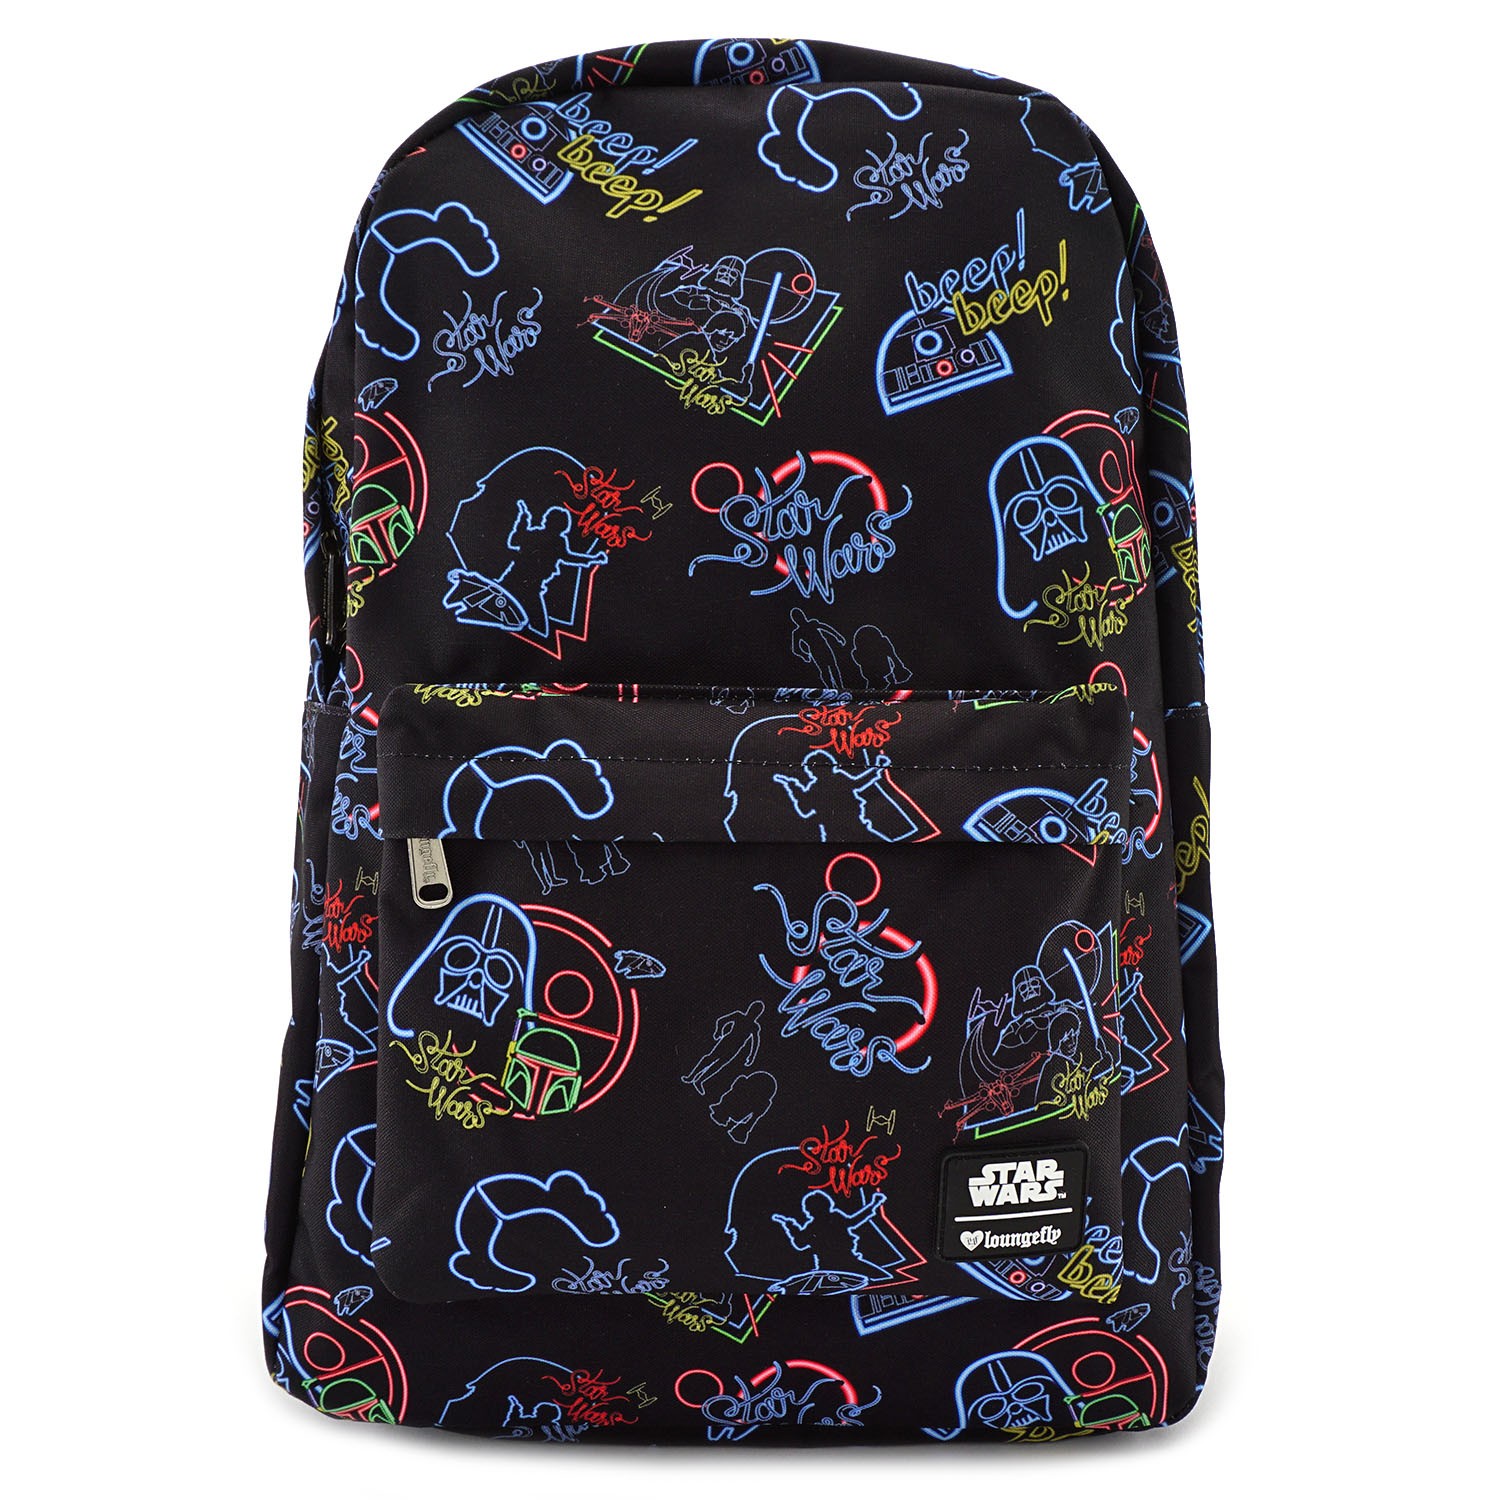 Loungefly x Star Wars Neon Print Backpack